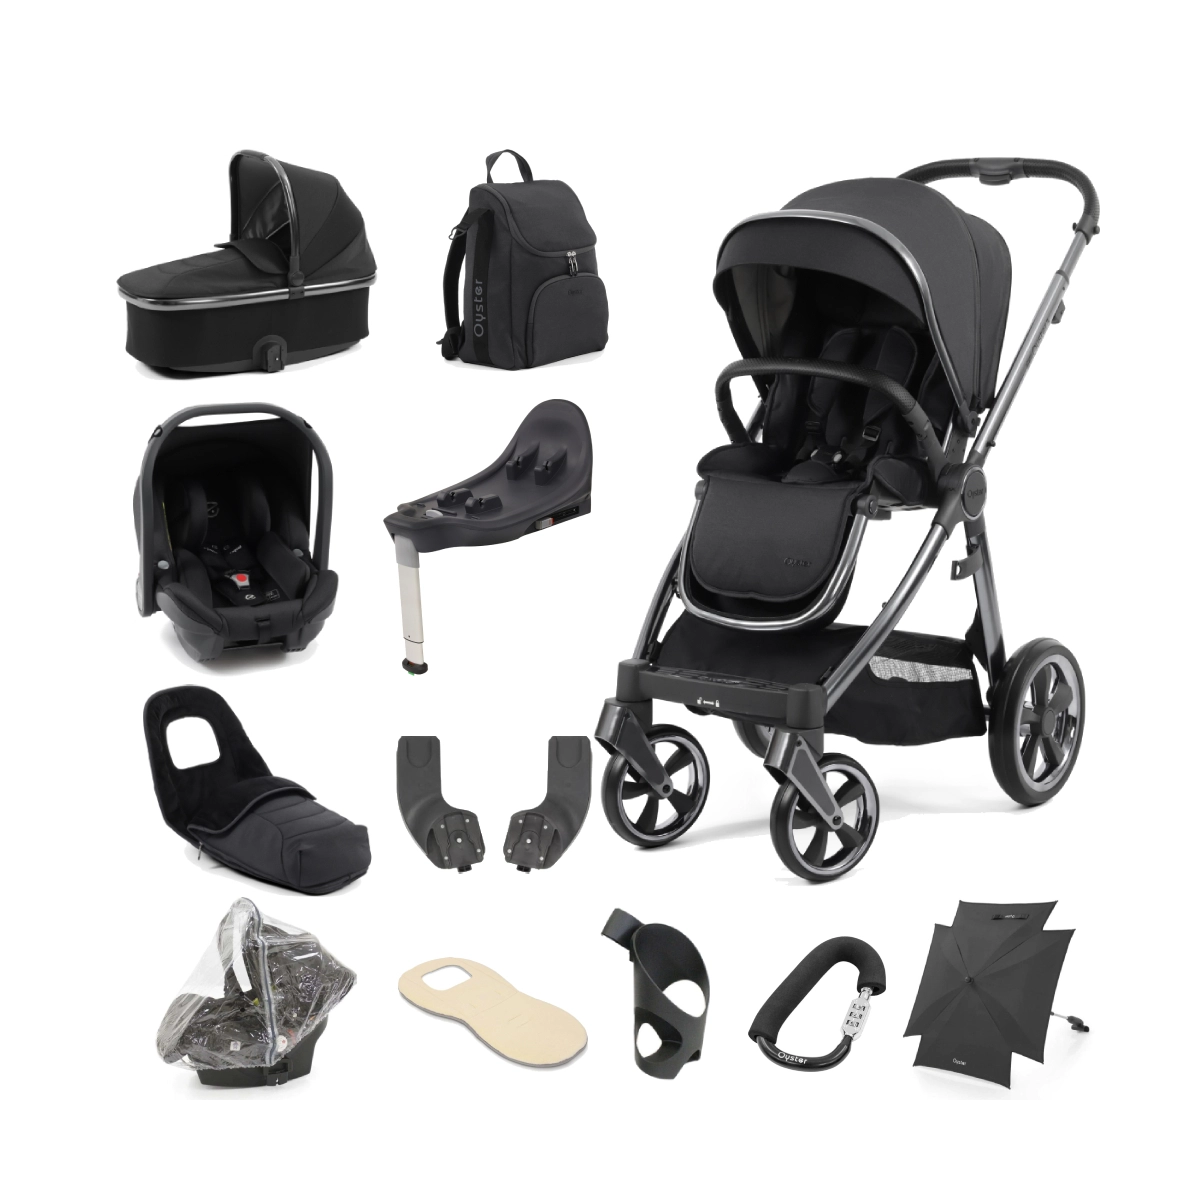 BabyStyle Oyster 3 Gun Metal Chassis 12 Piece Ultimate Travel System